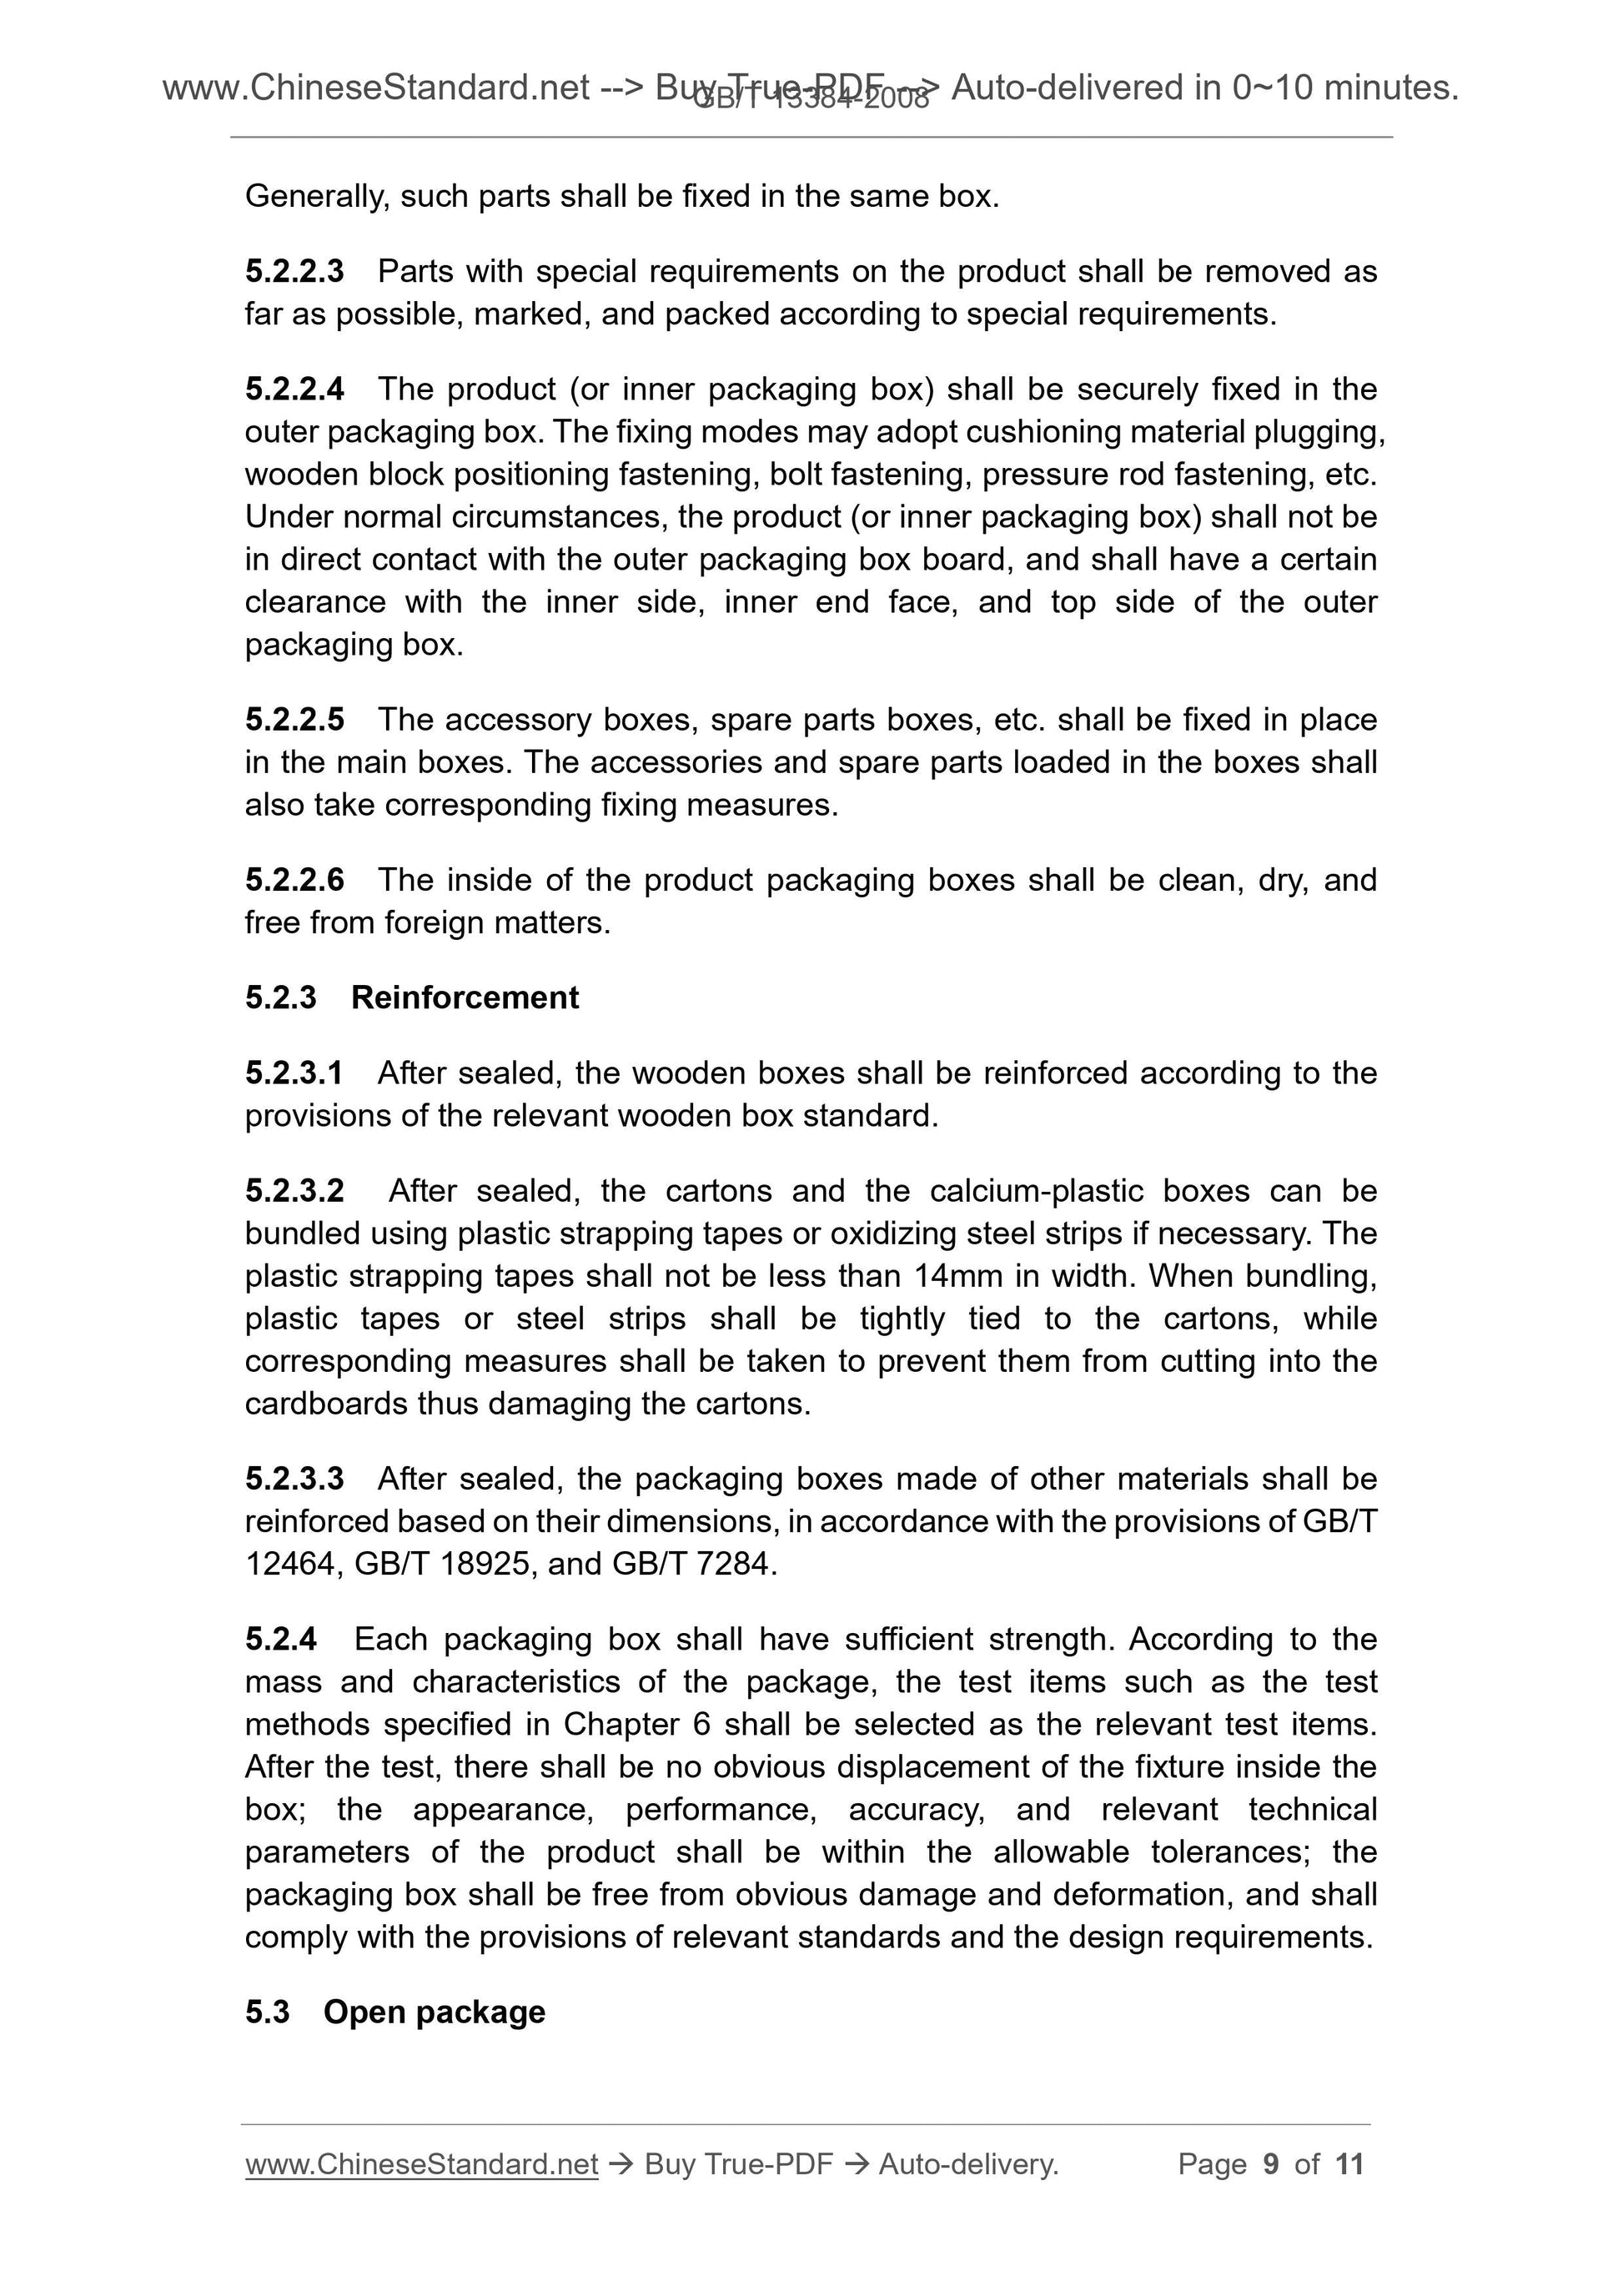 GB/T 13384-2008 Page 6